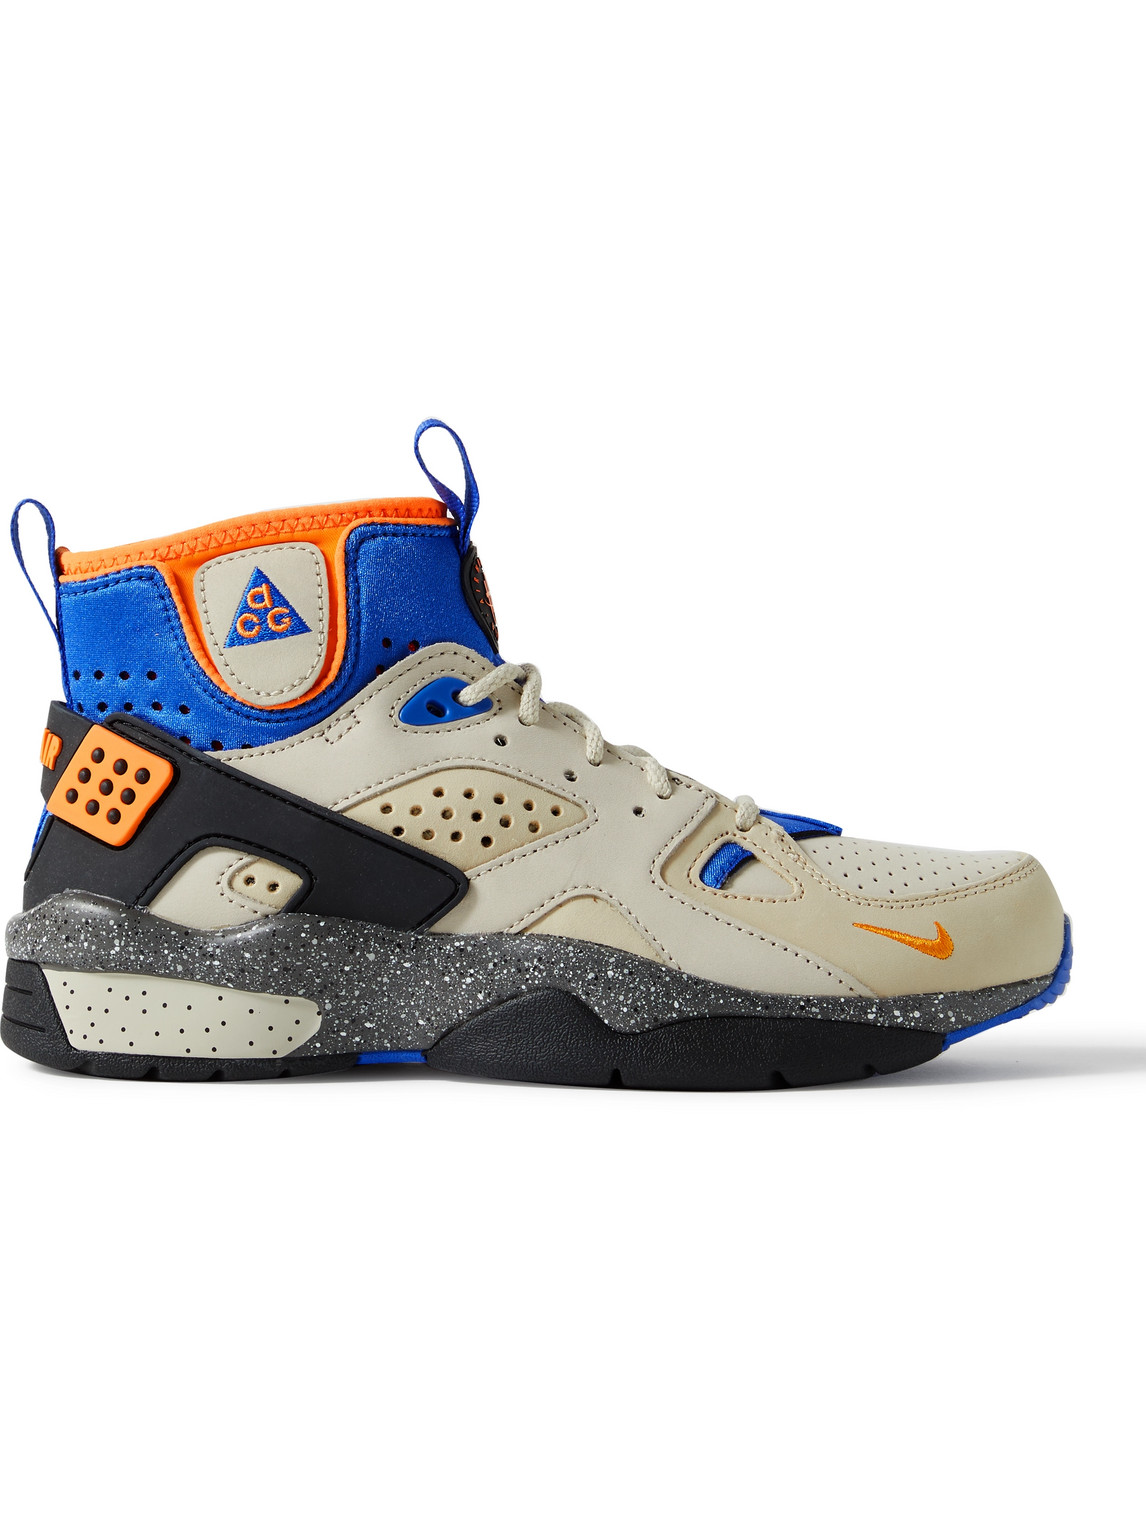 ACG Air Mowabb Suede, Neoprene and Rubber High-Top Sneakers